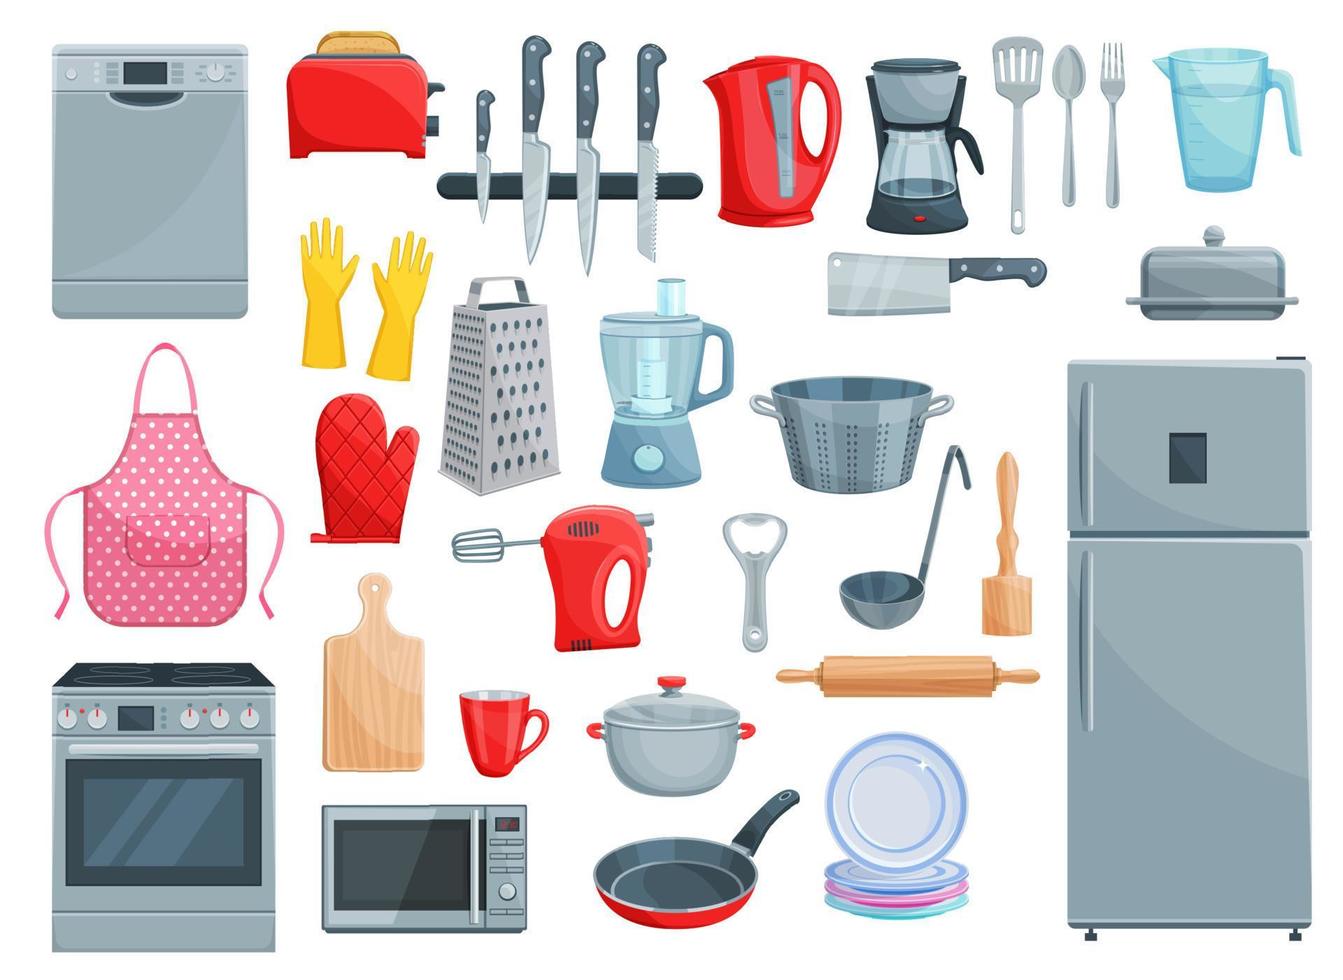 Kitchen appliances and dishware vector icons set